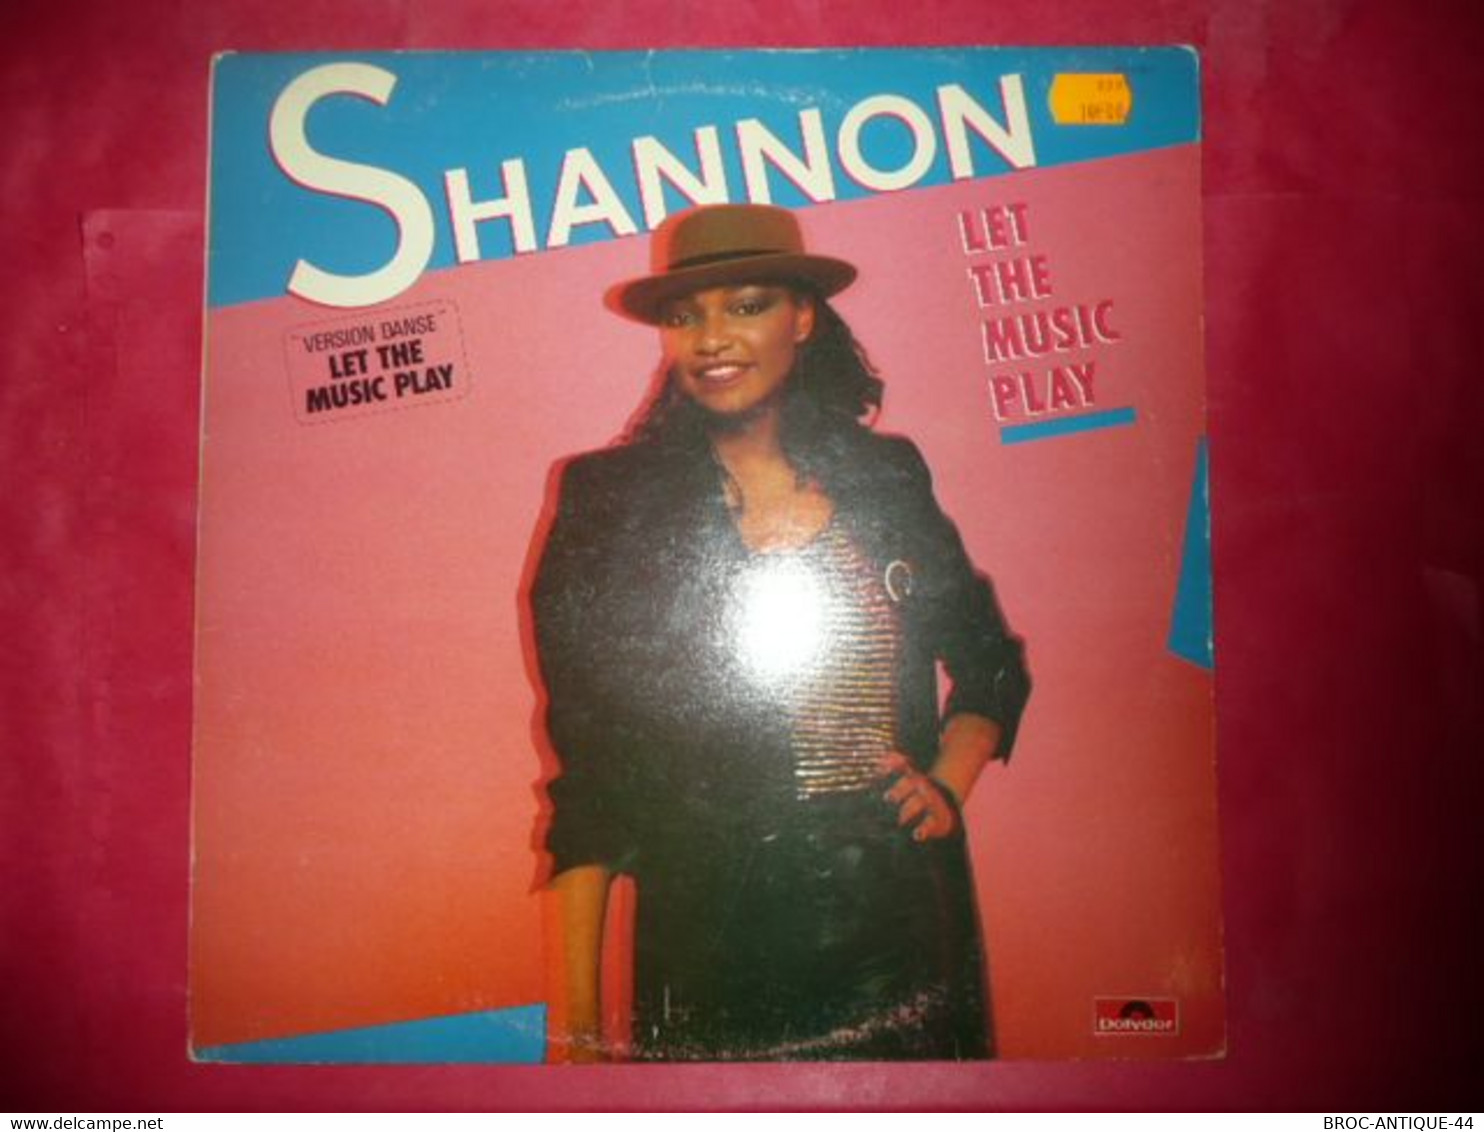 LP33 N°6559 - SHANNON - LET THE MUSIC PLAY - 821015-1 - ELECTRO DISCO FUNK ***** - Disco, Pop